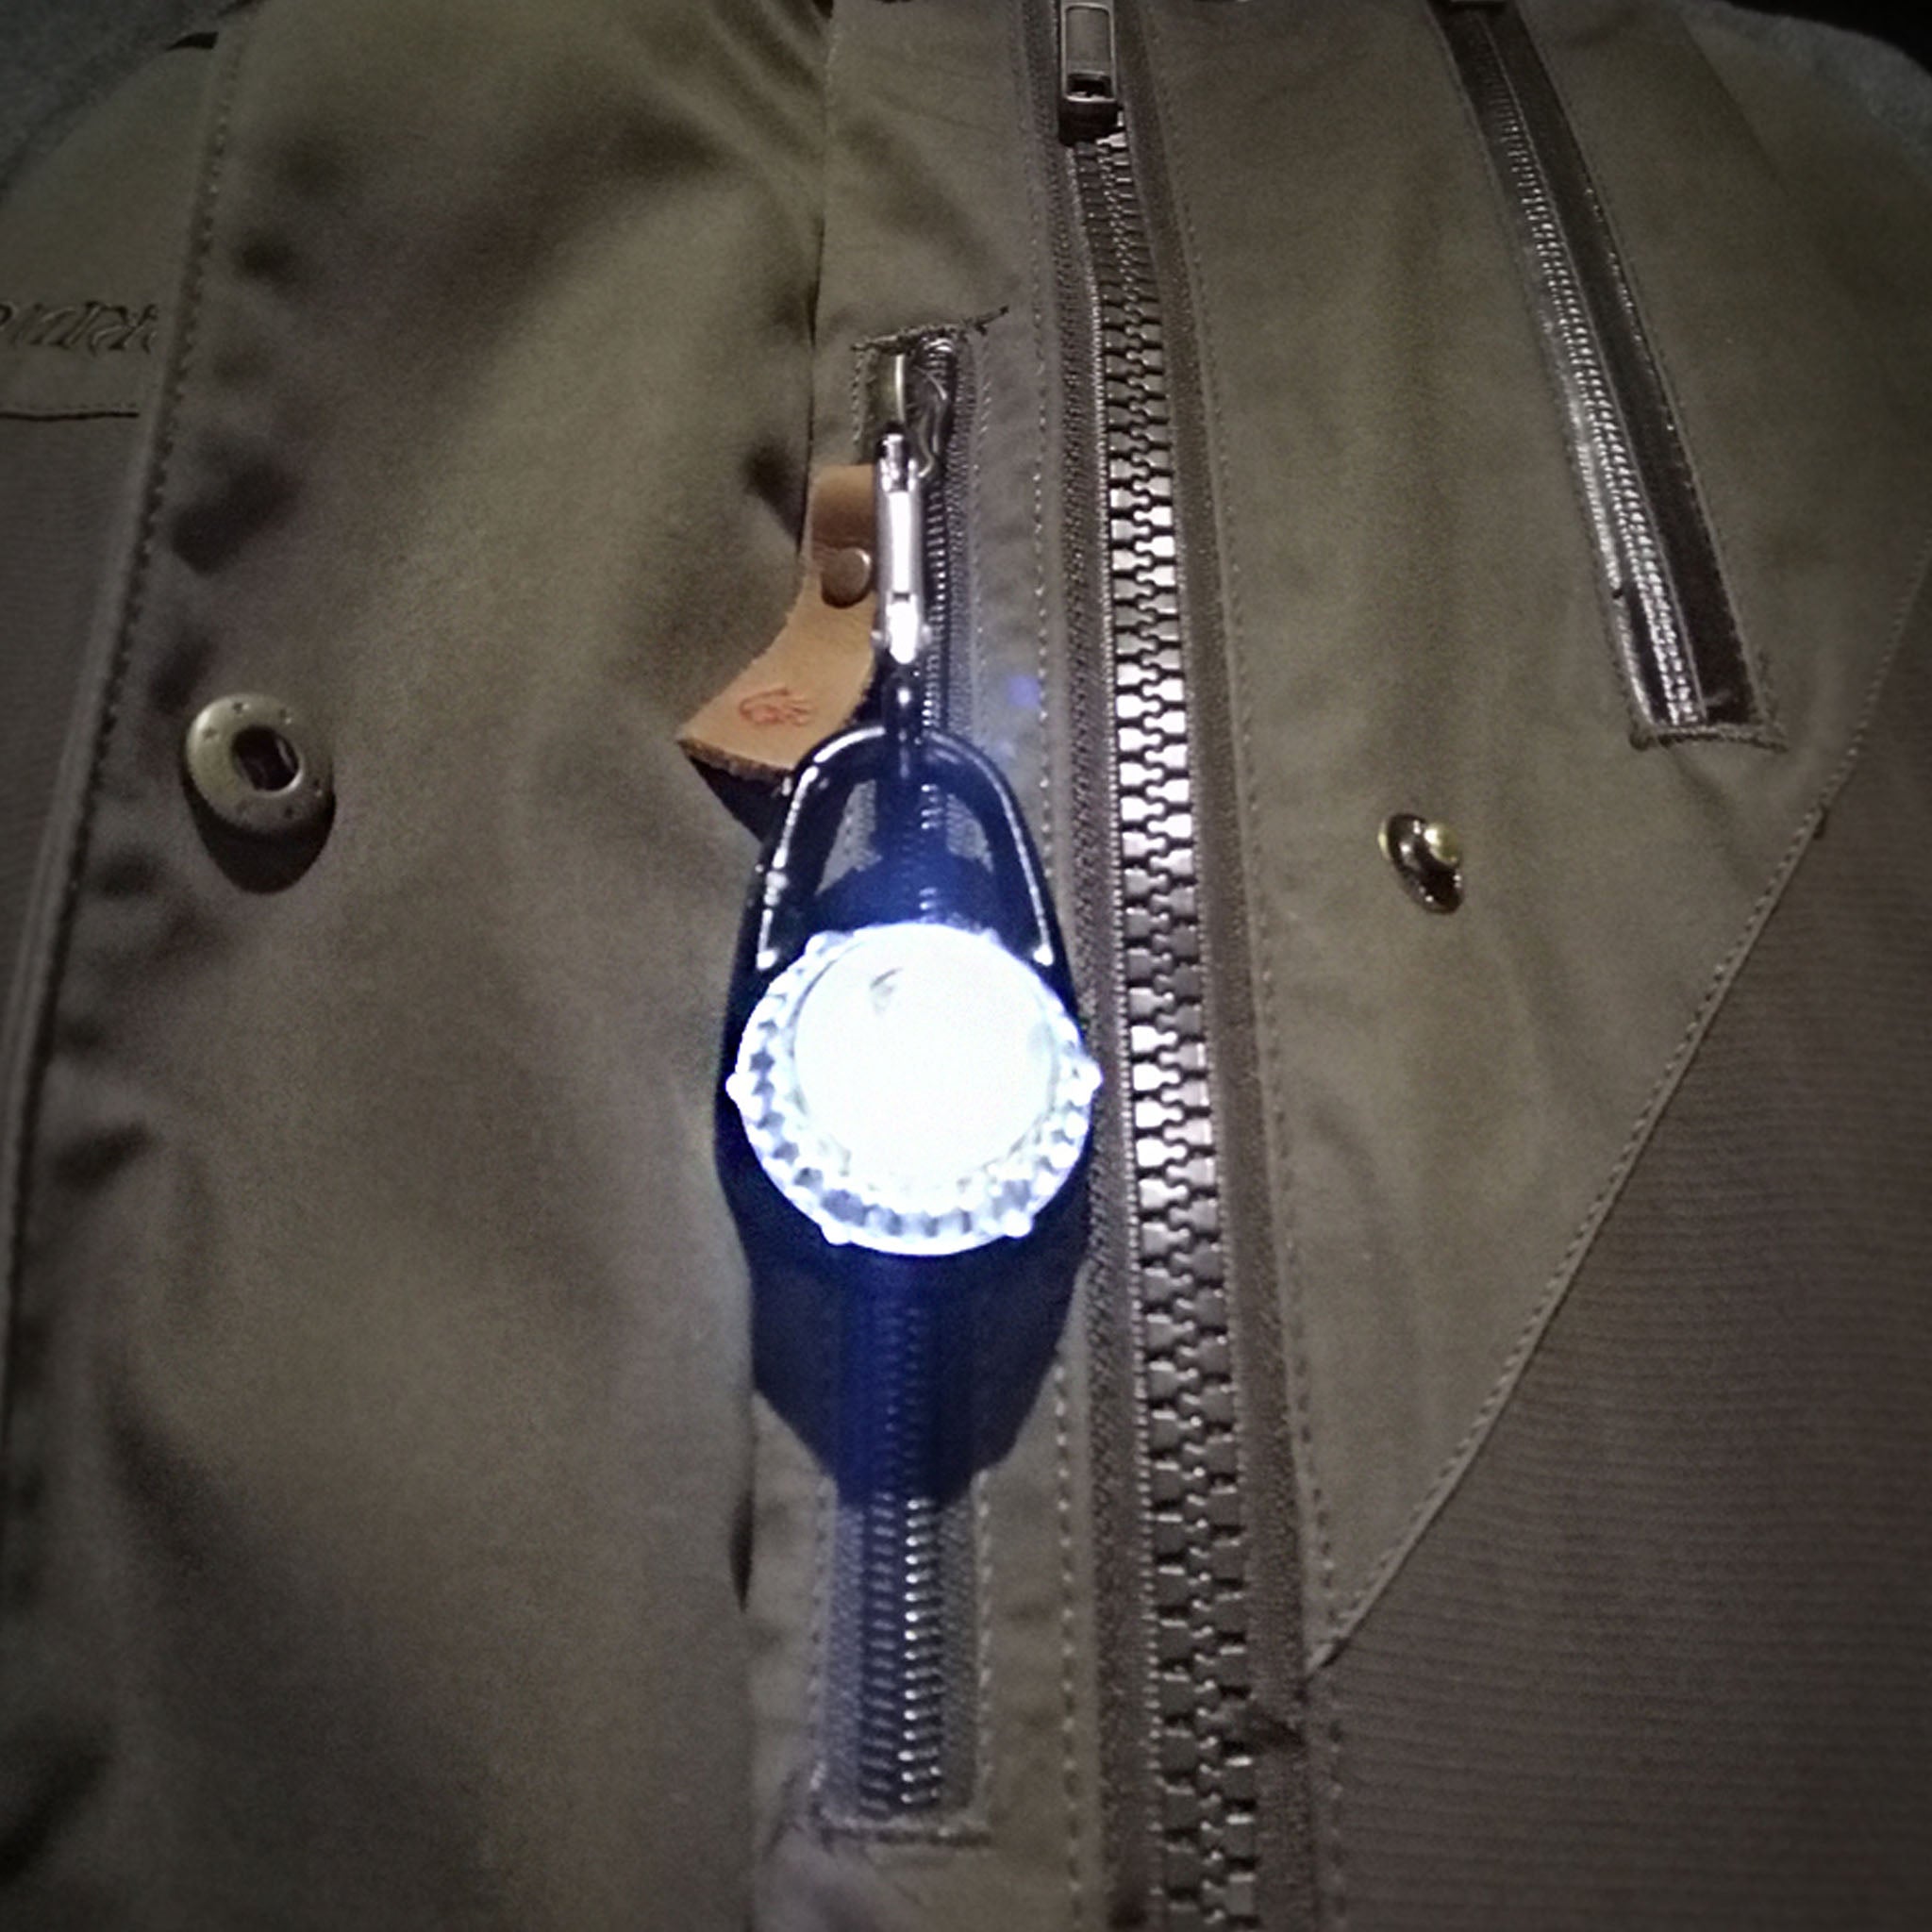 Adventure Tag-It Lights - Highly Visible light to 5km